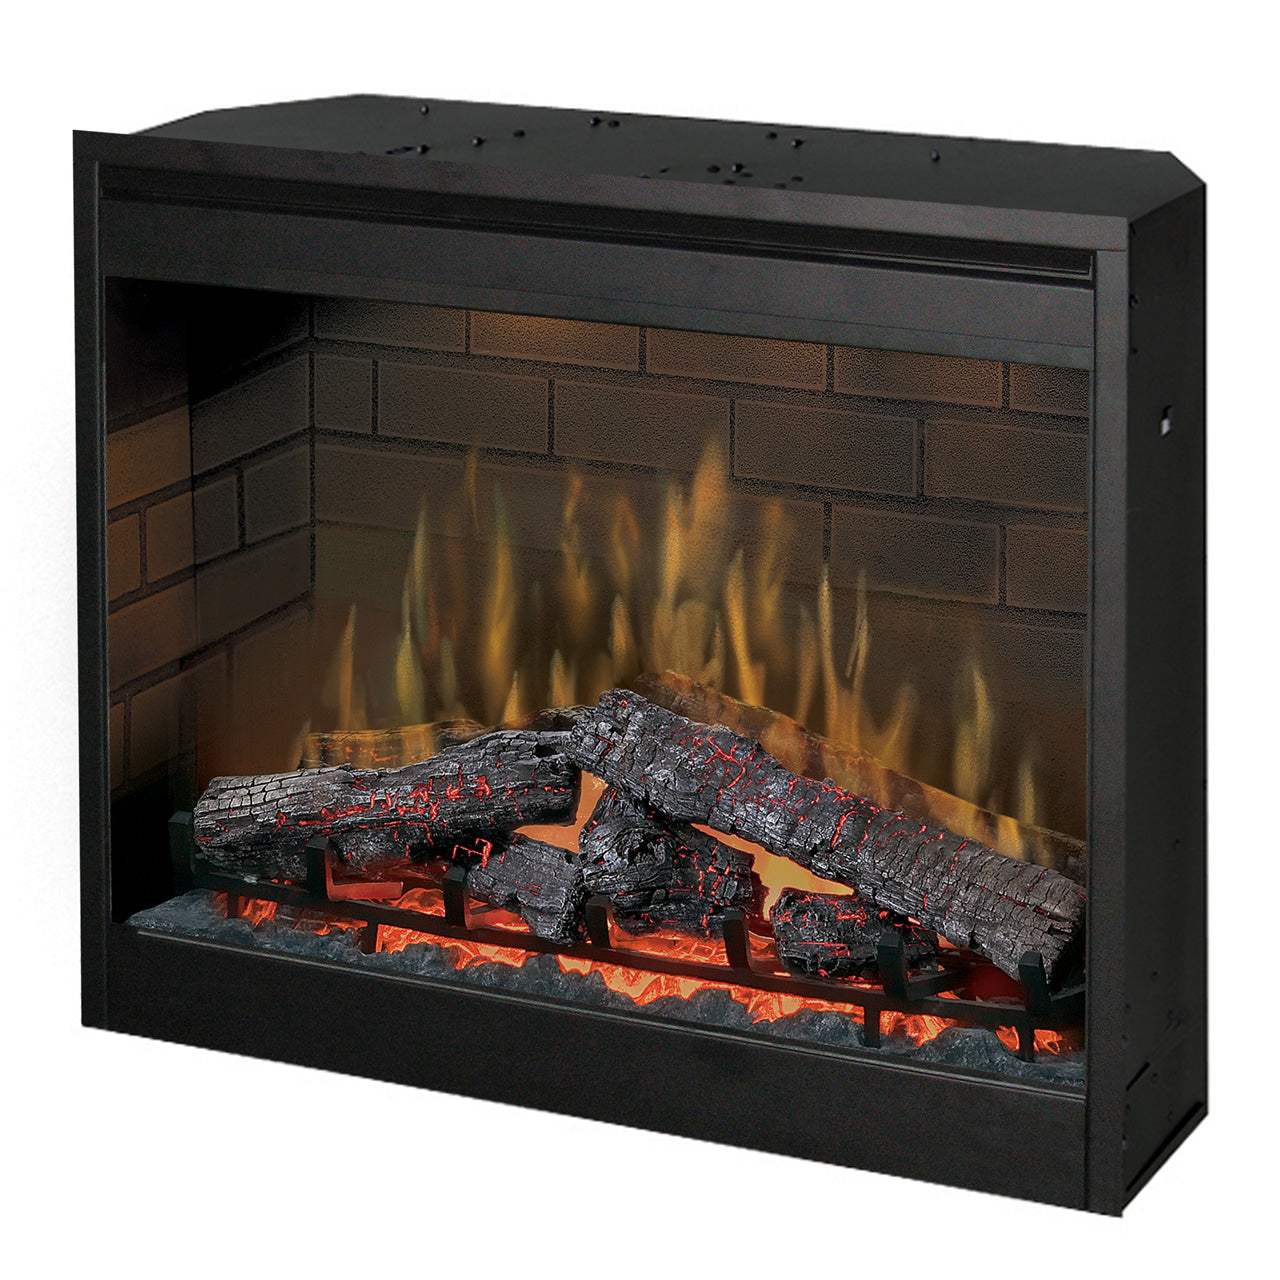 Dimplex 30" Plug-in Electric Fireplace Insert  - DF3015 - Fireplace Choice